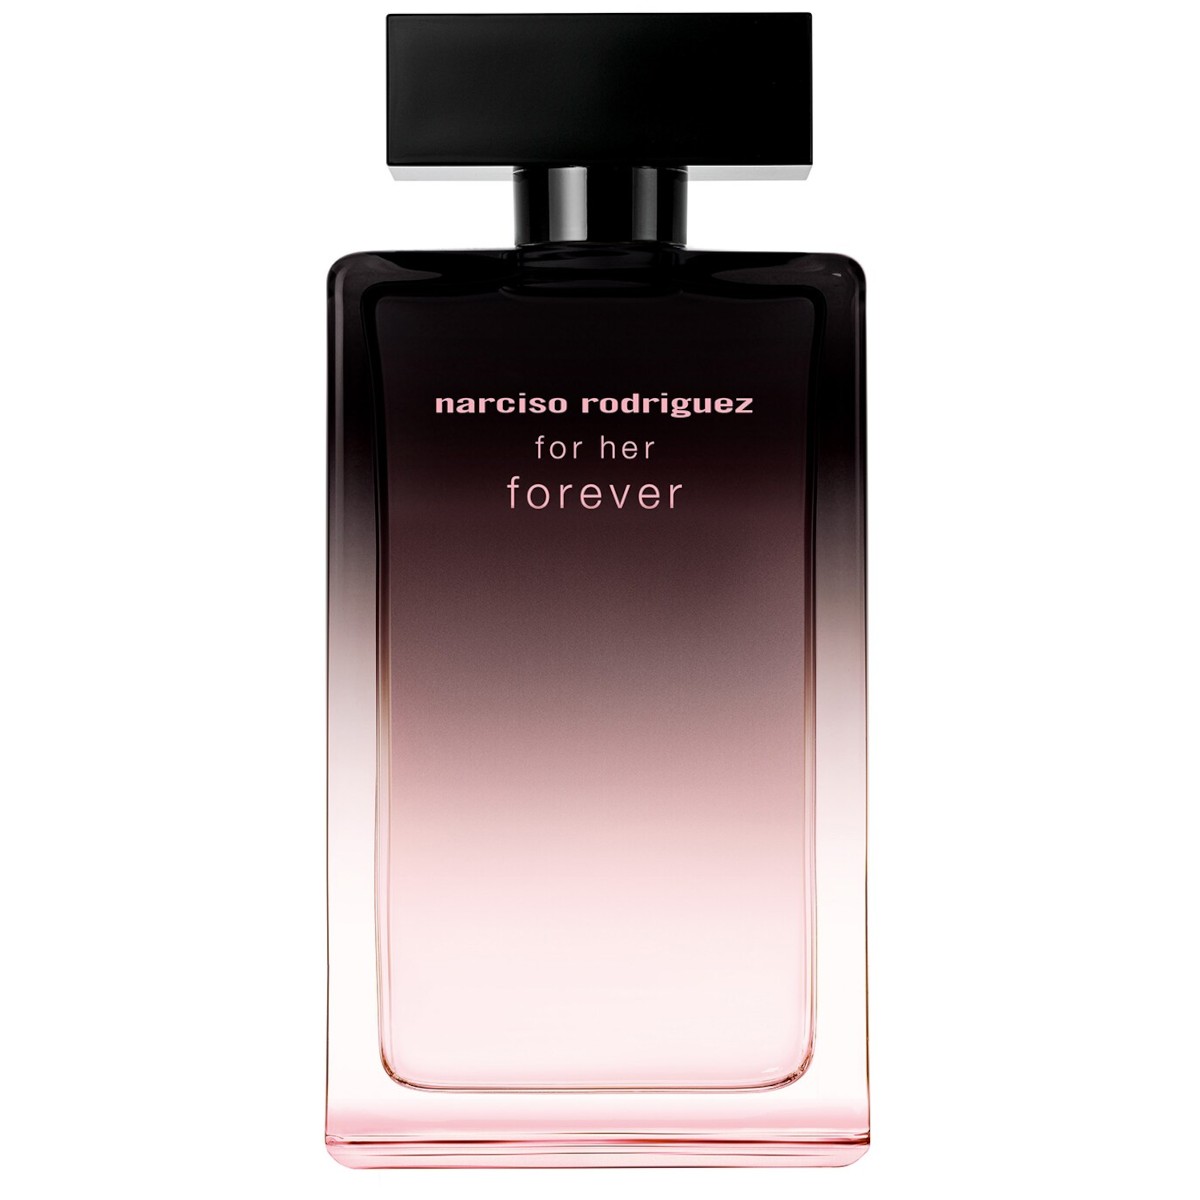 Narciso Rodriguez For Her Forever profumo donna